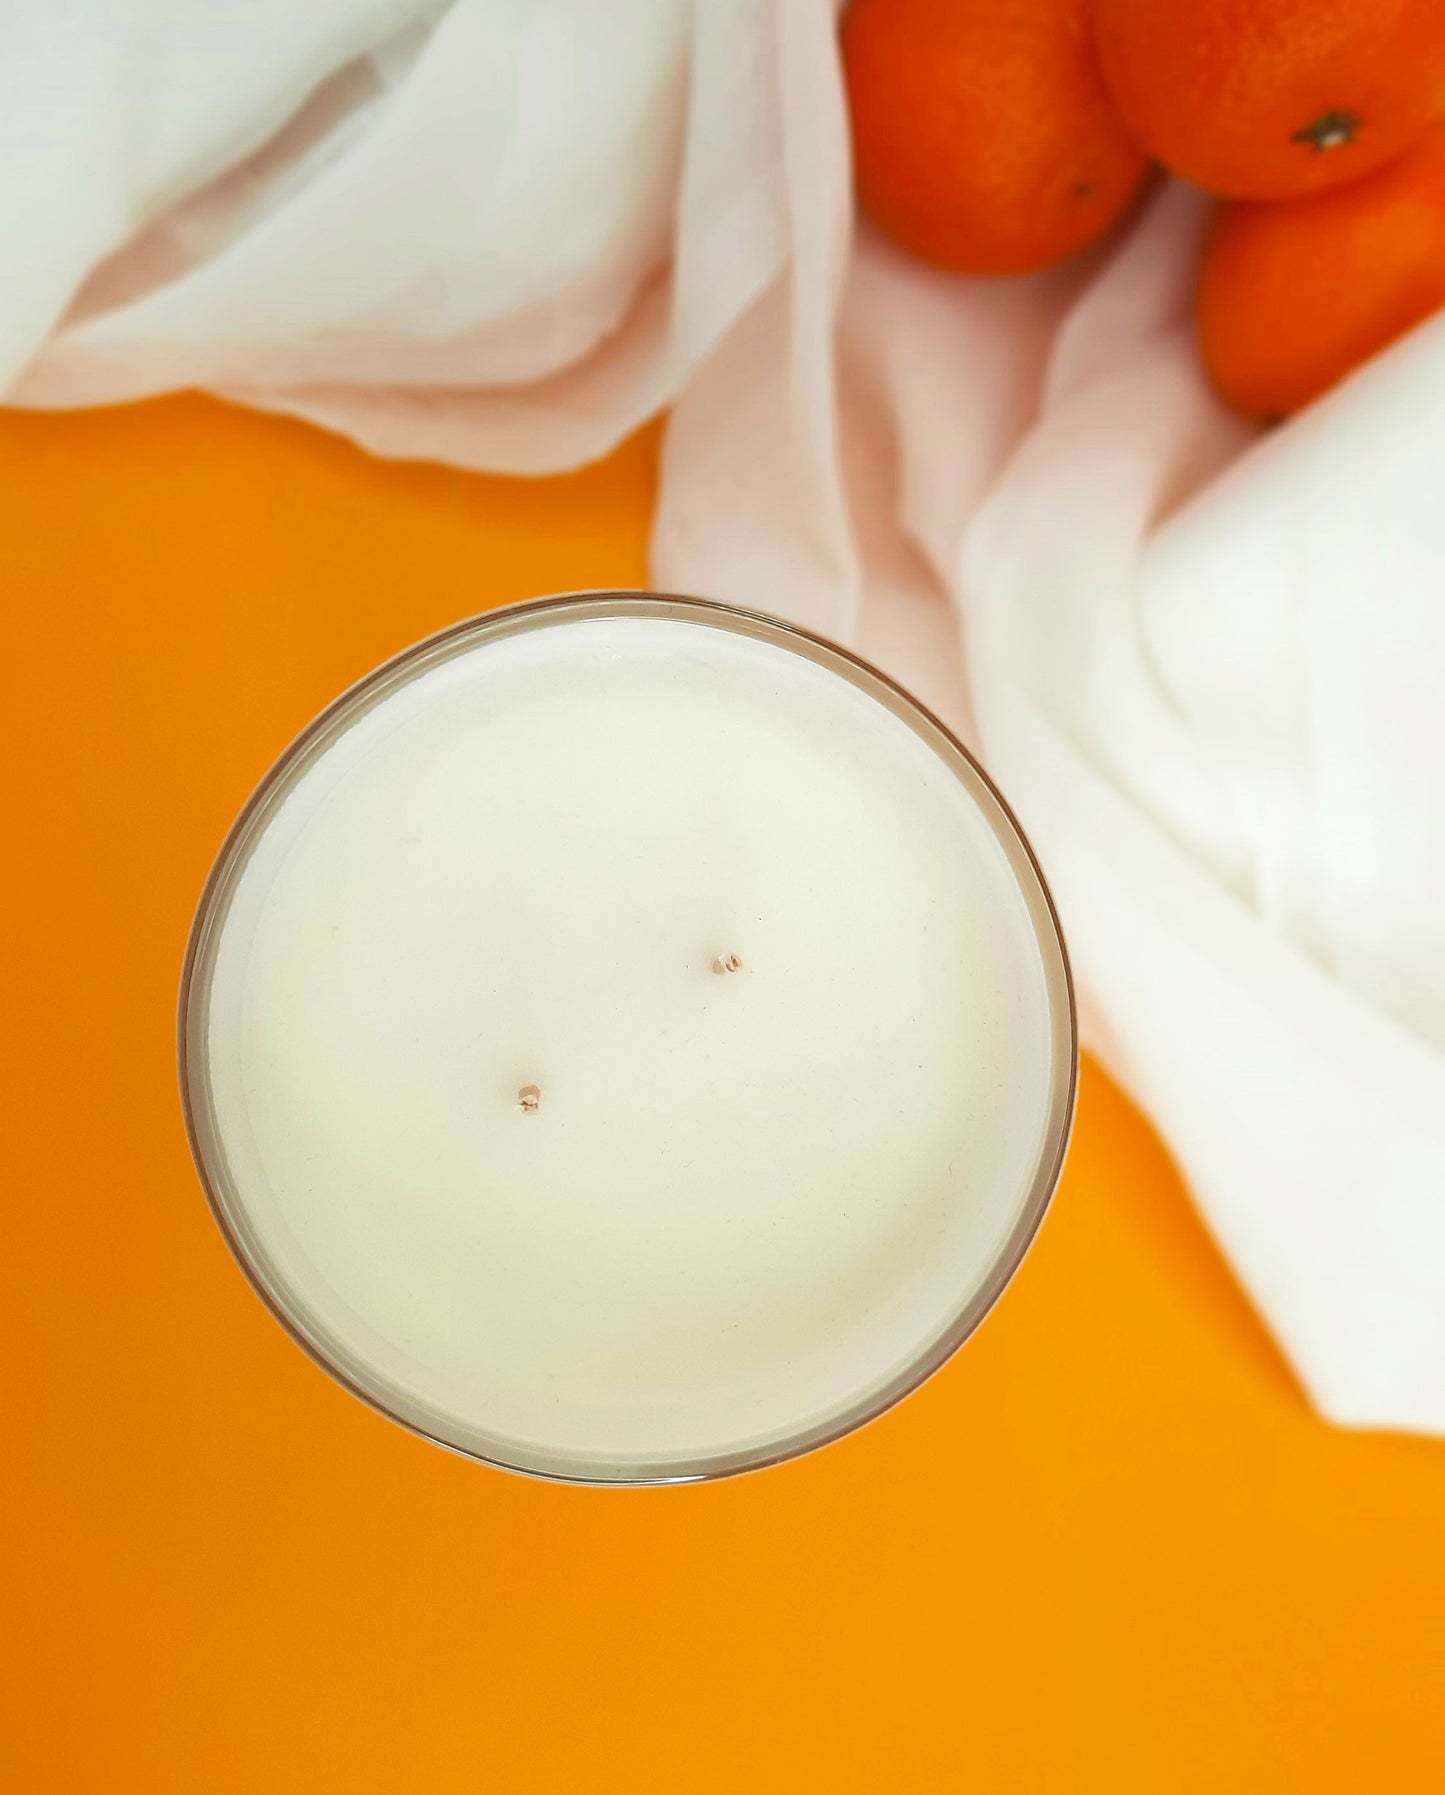 Sweet Clementine 13 oz Luxury Candle